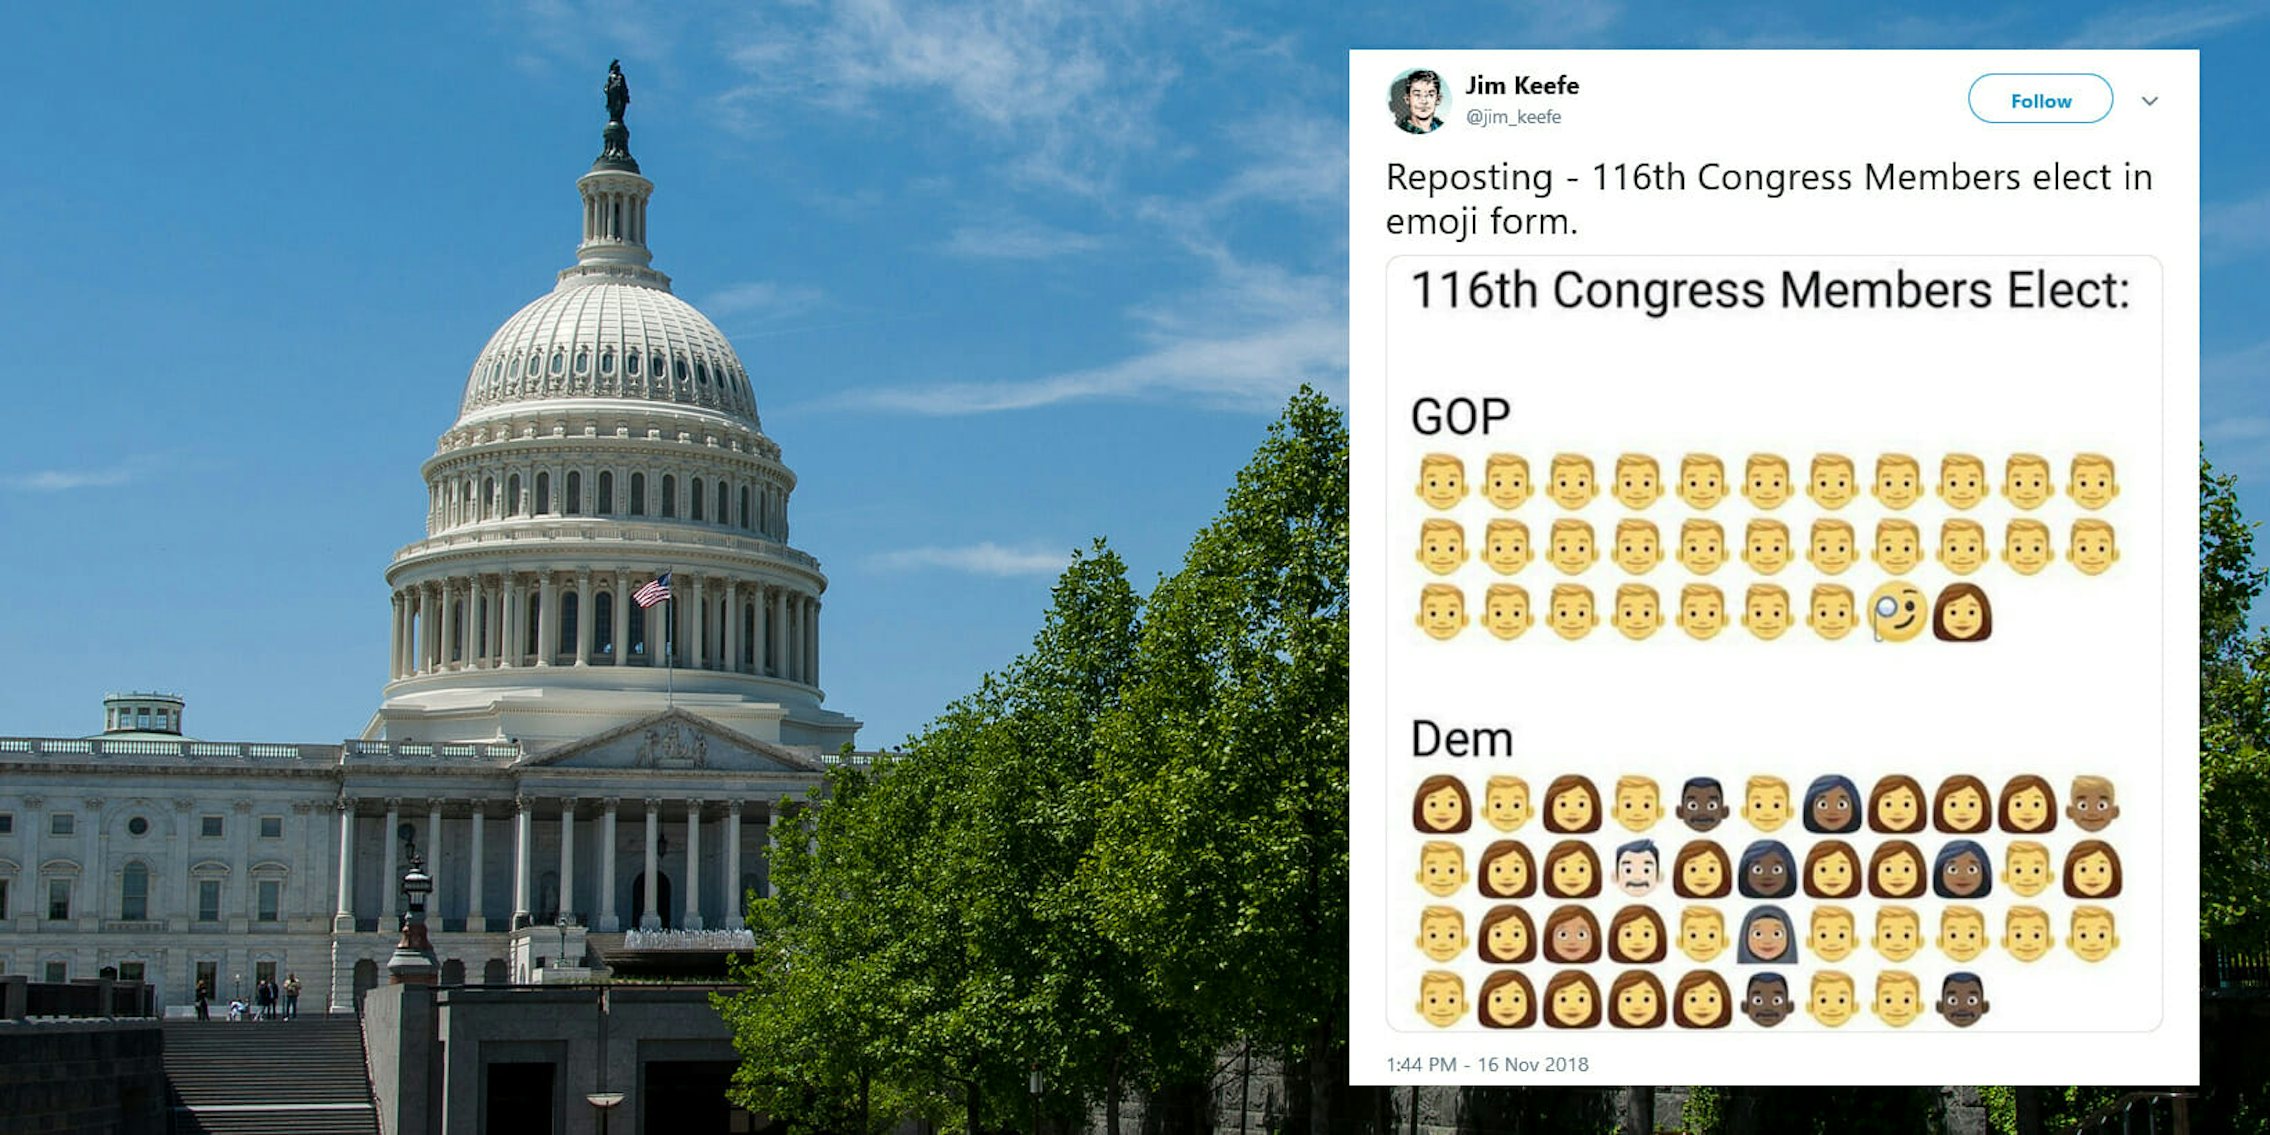 There will be more diversity in the 119th Congress after last week's midterm elections, and that fact is summed up well in an emoji-Congress meme.